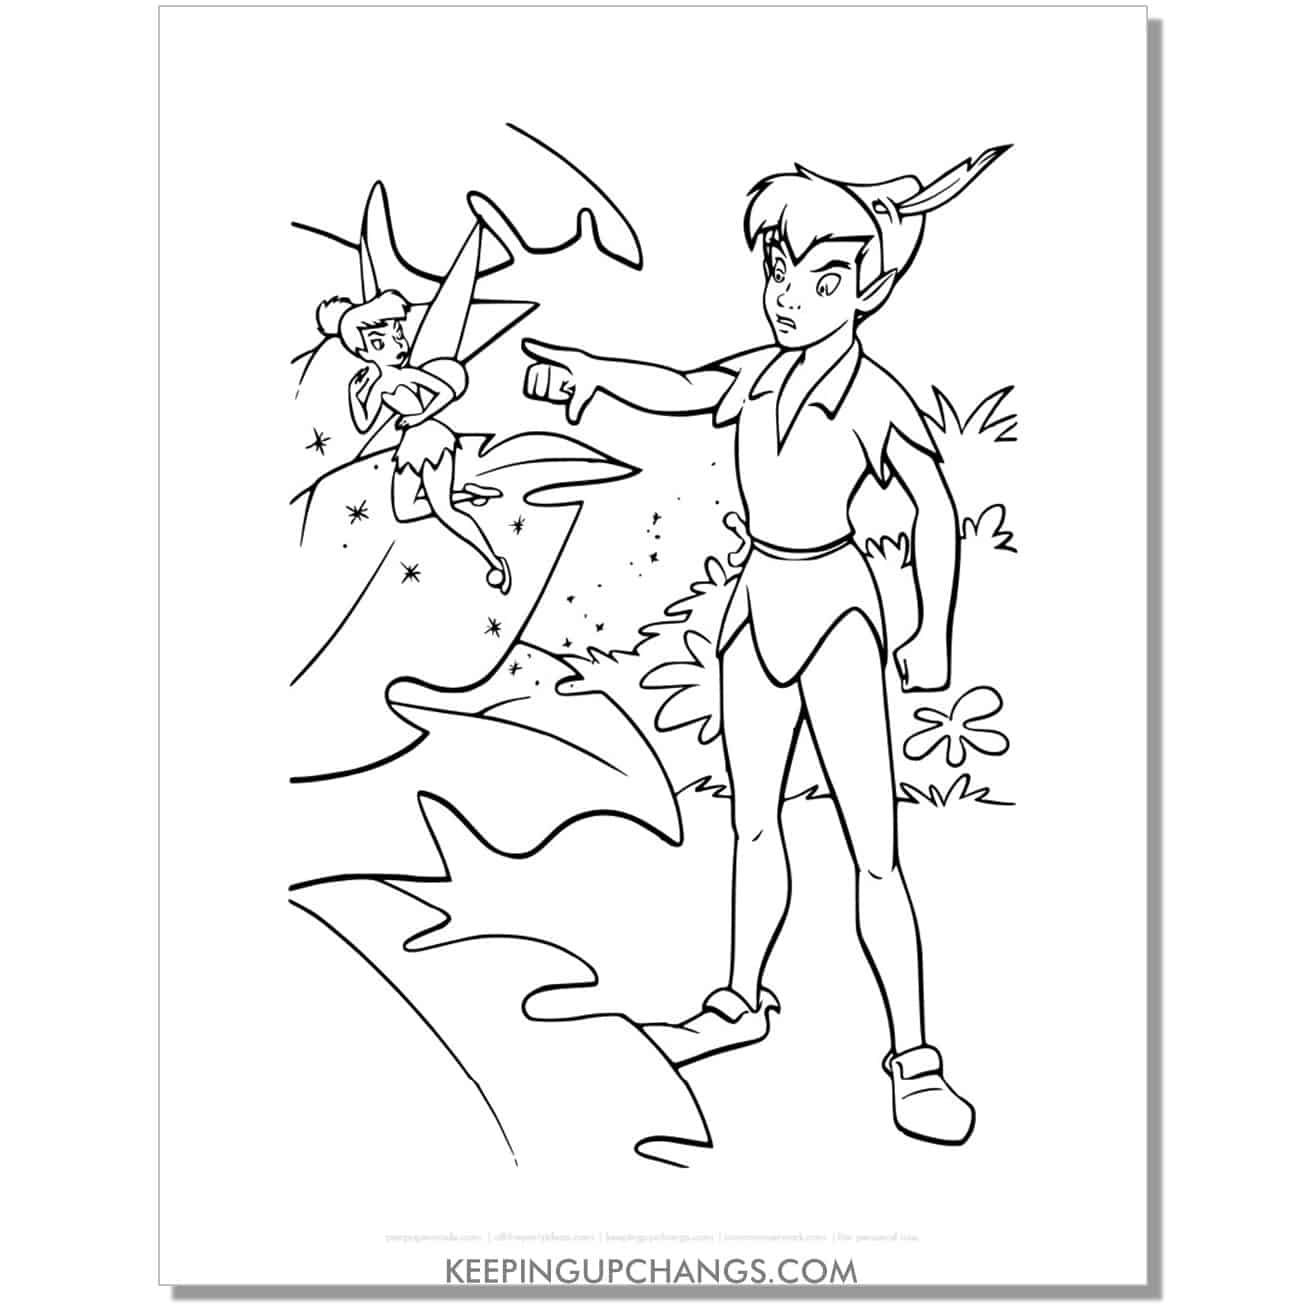 peter pan points to tinkerbell coloring page, sheet.